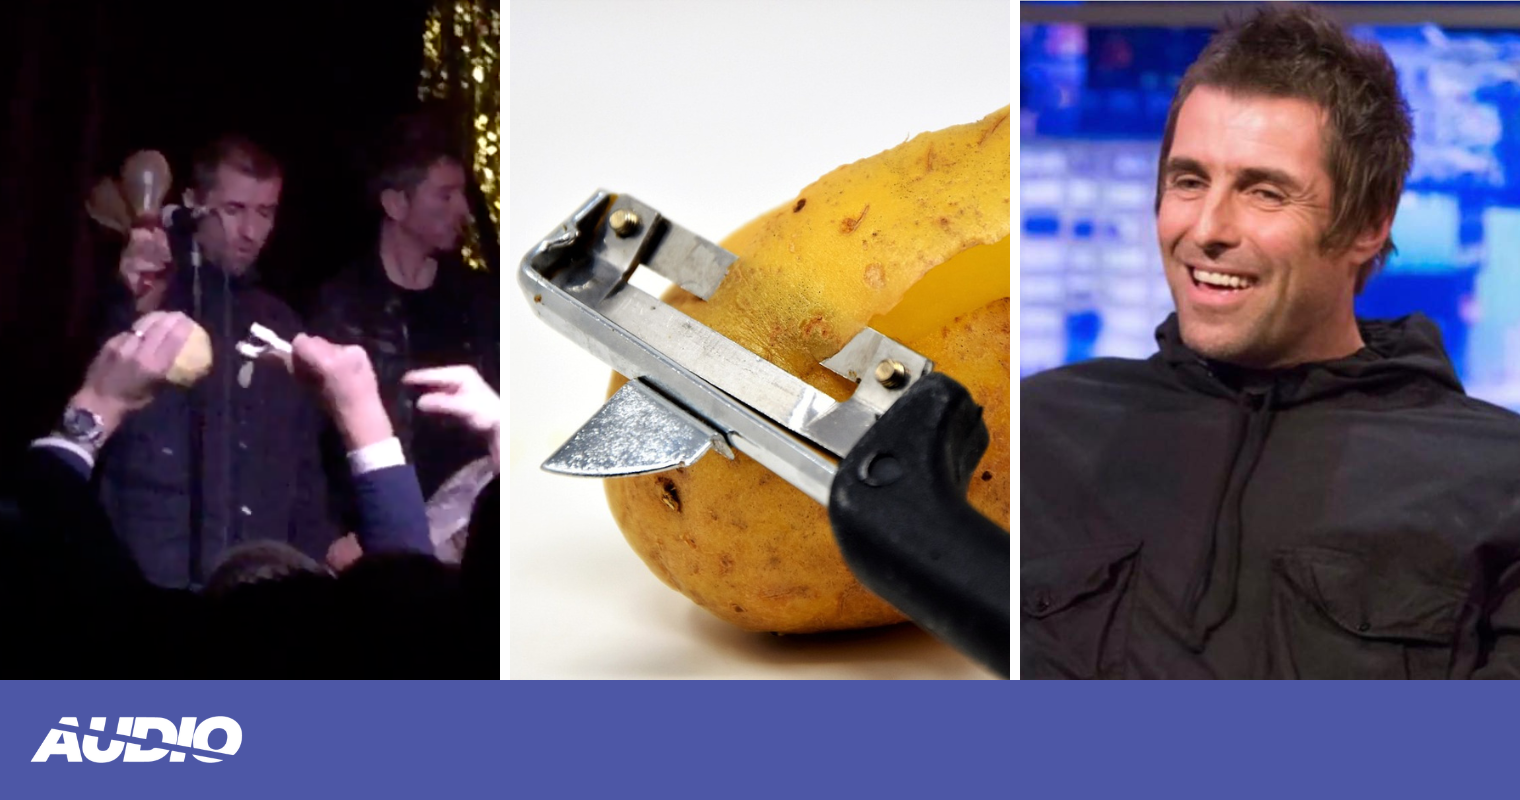 https://themanc.com/wp-content/uploads/2023/06/fan-peels-potatoes-at-liam-gallagher-gig.png